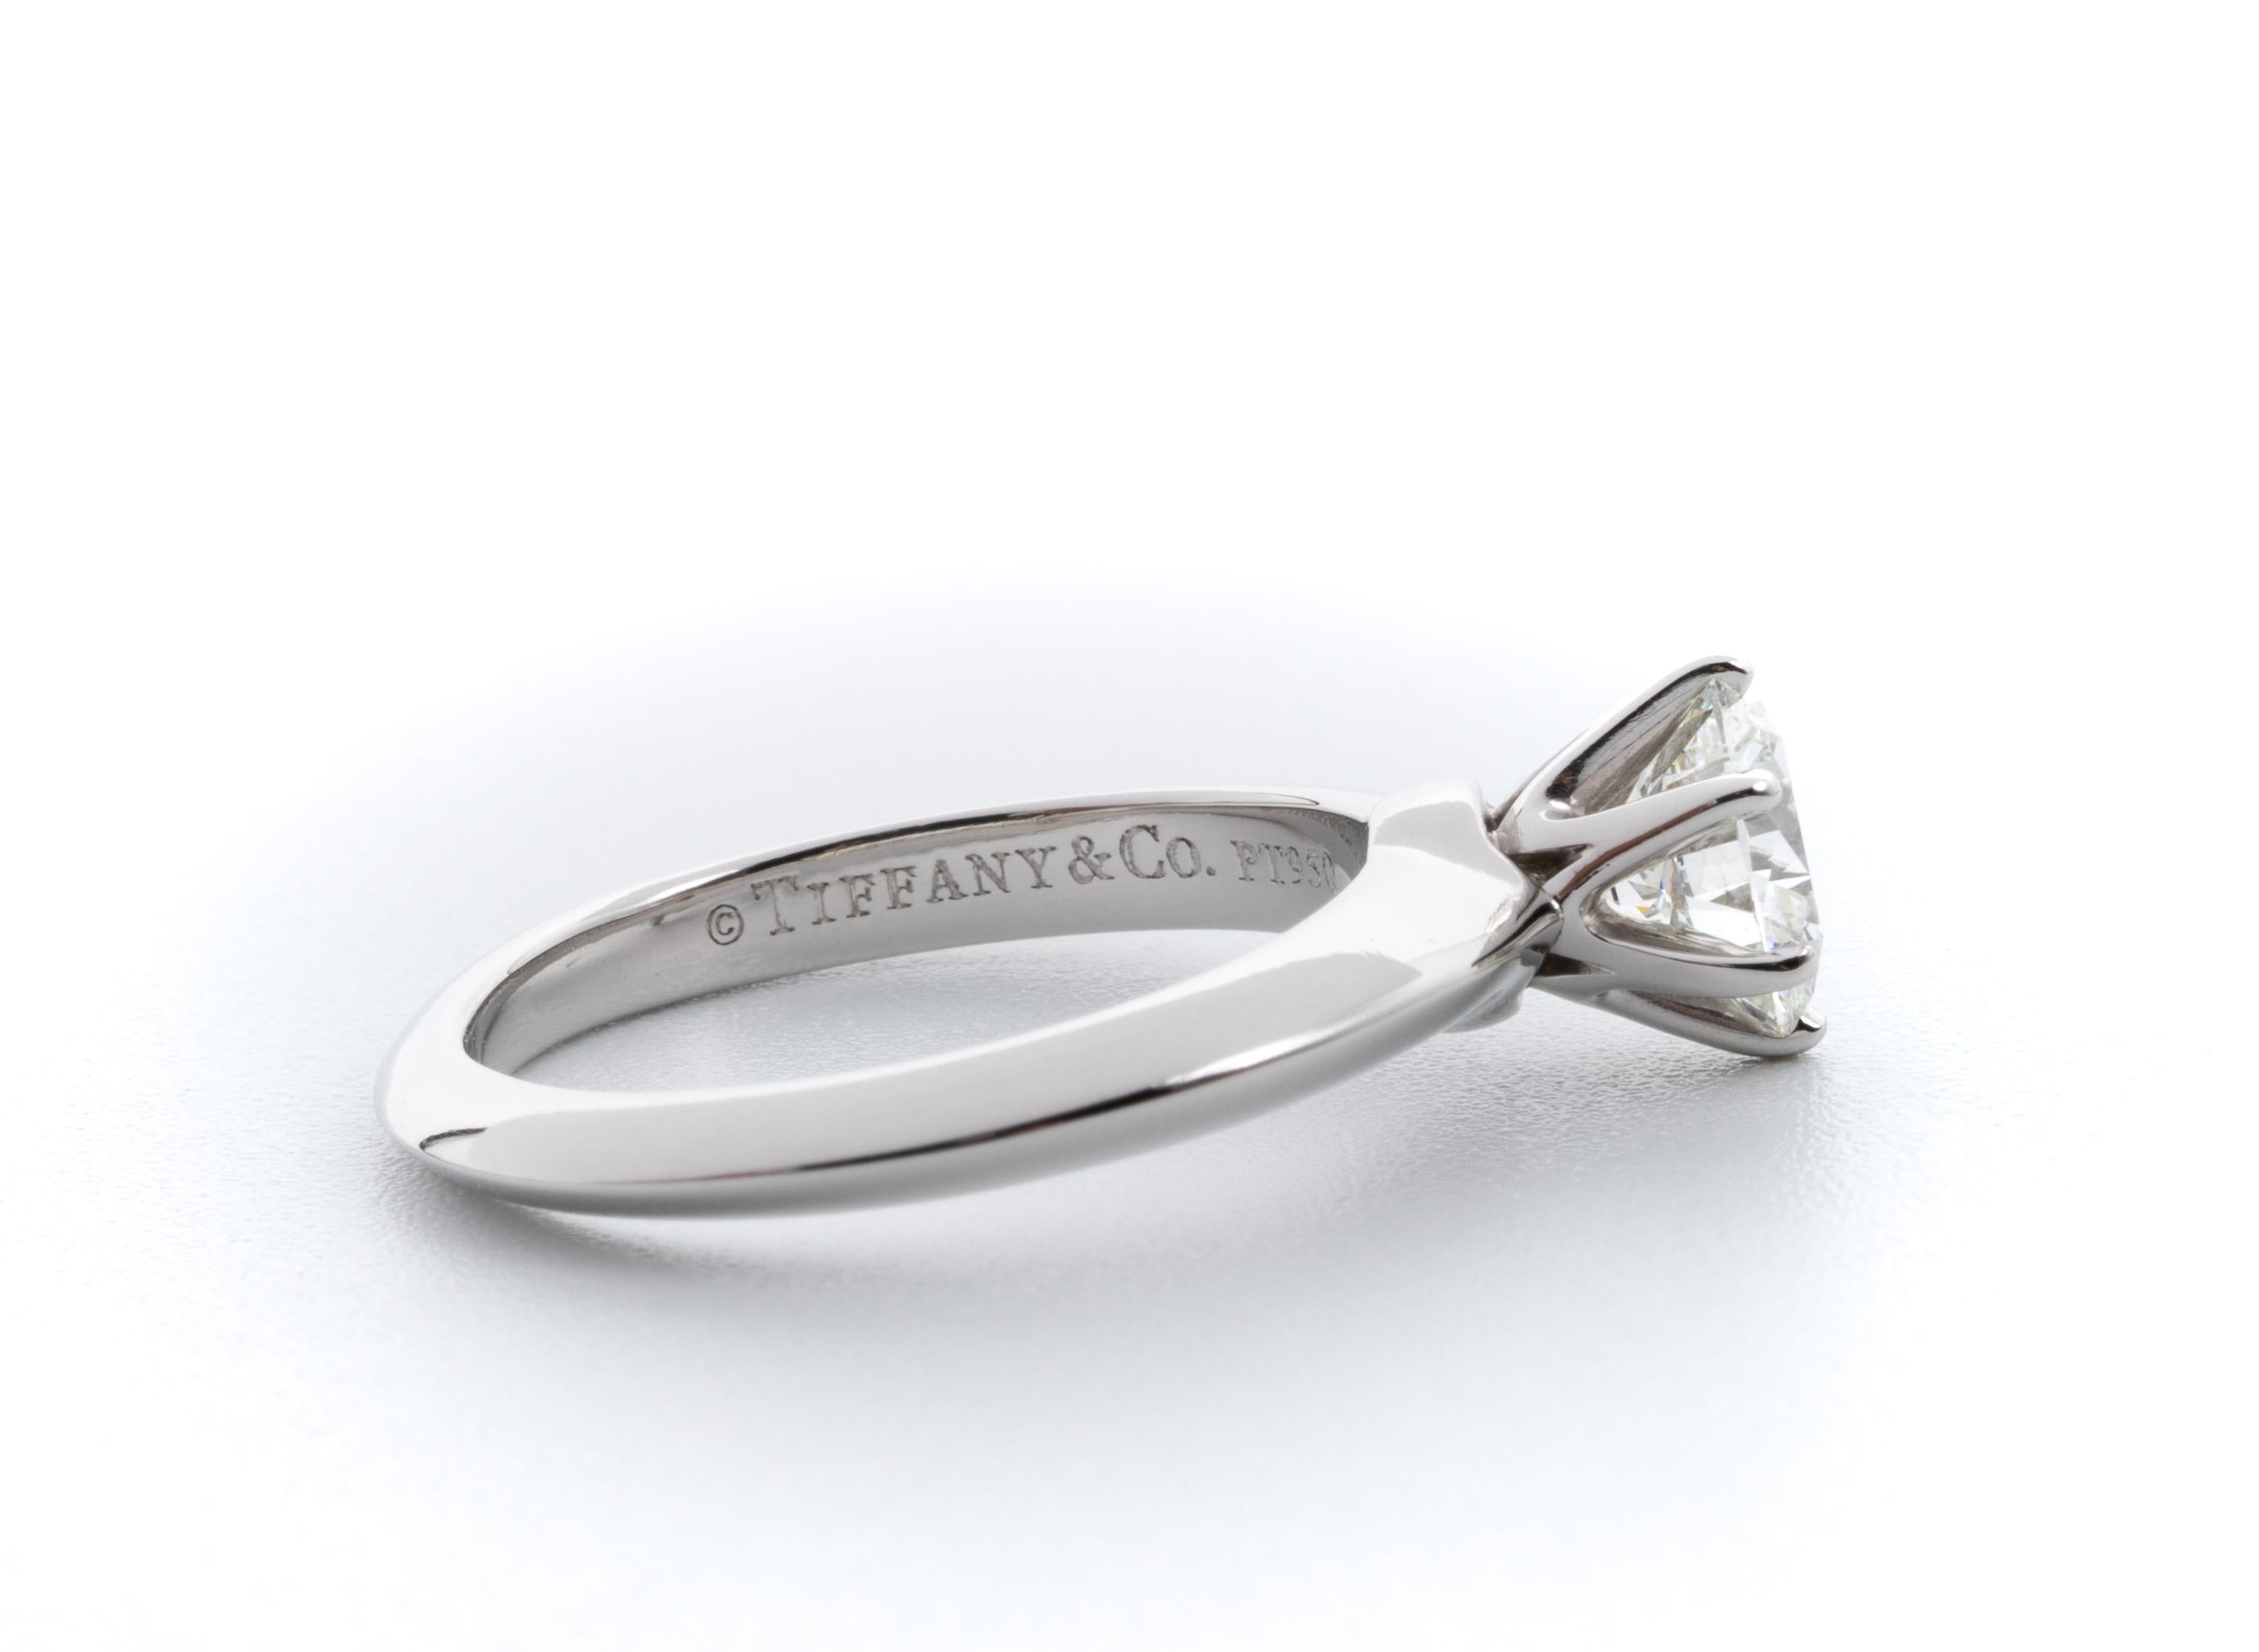 Tiffany & Co. Diamond Engagement Solitaire signed by Tiffany & Co. featuring a .96 ct Center, graded by Tiffany H color , and VS1 Clarity.
In Platinum
Includes GIA certificate , Original Tiffany Certificate and Box and Tiffany appraisal 
Crown